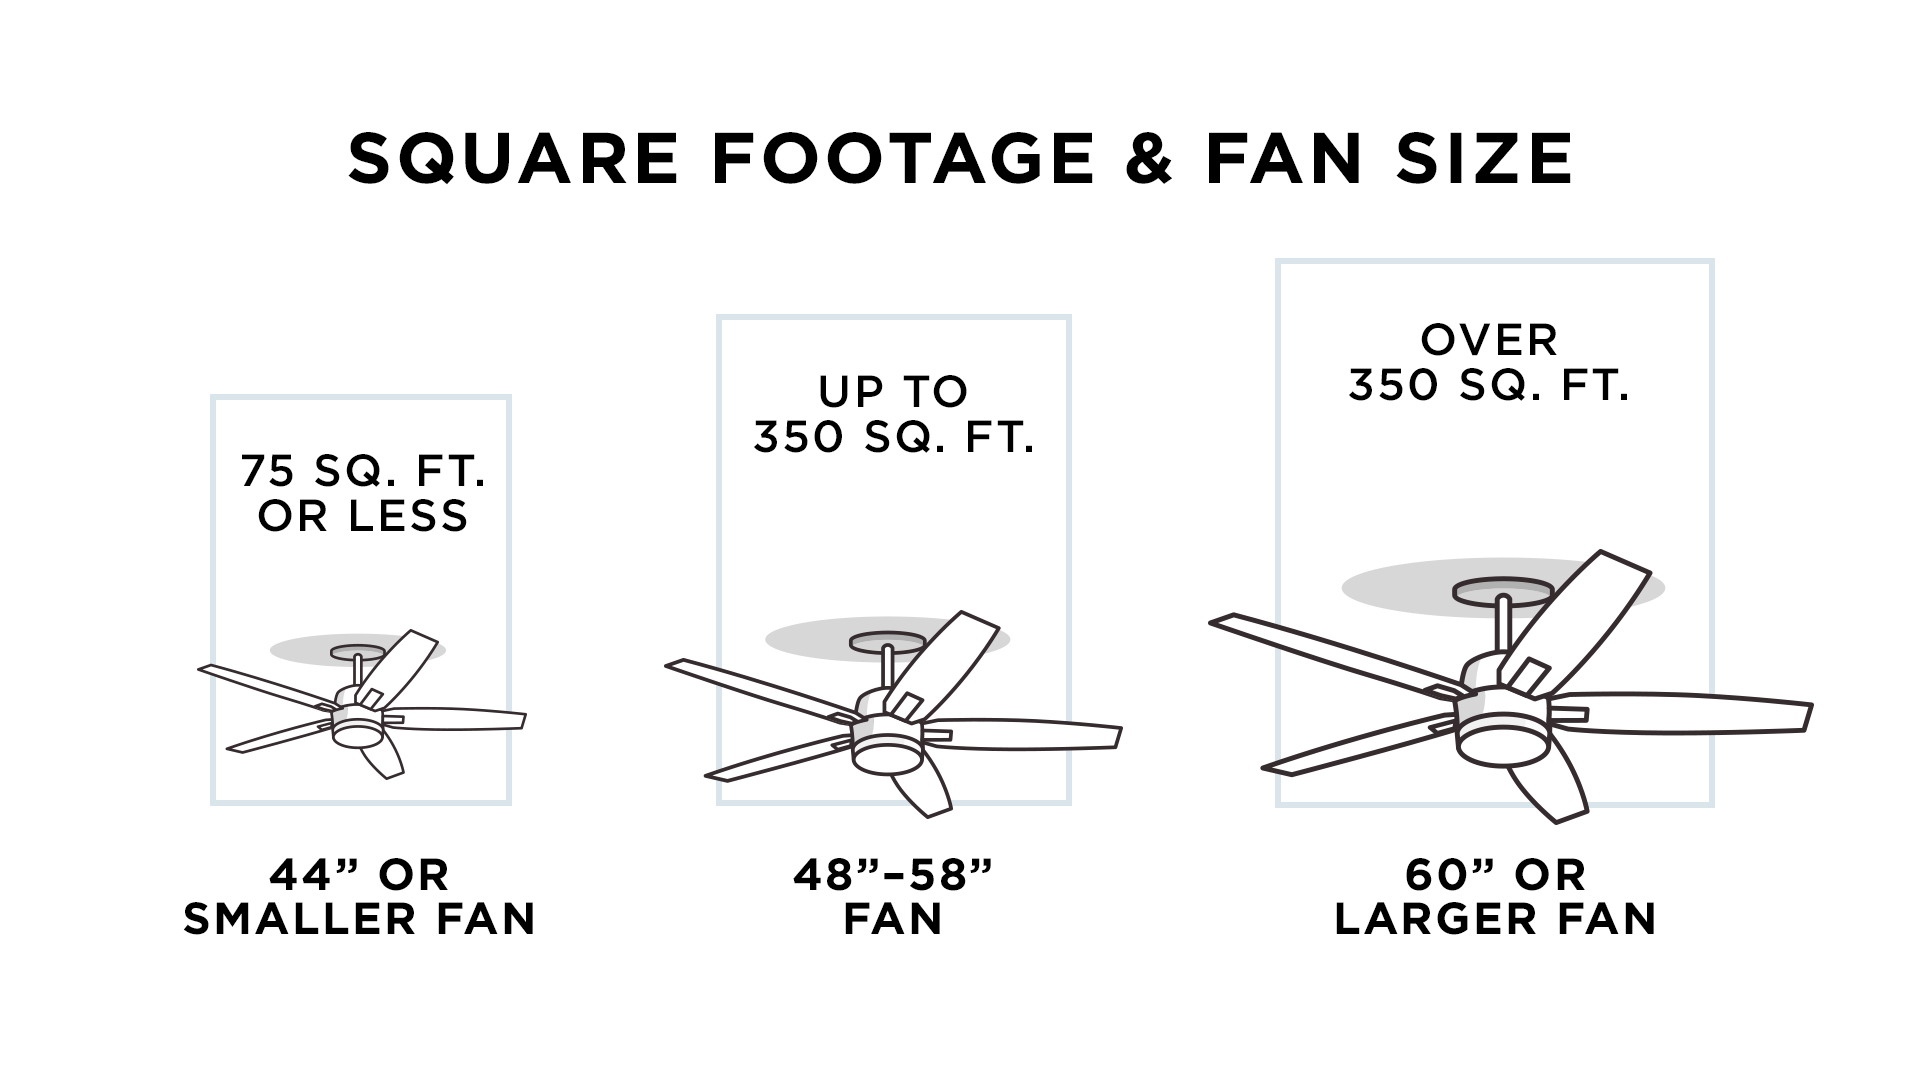 How to Buy a Ceiling Fan - A Four-Step Guide | Lamps Plus